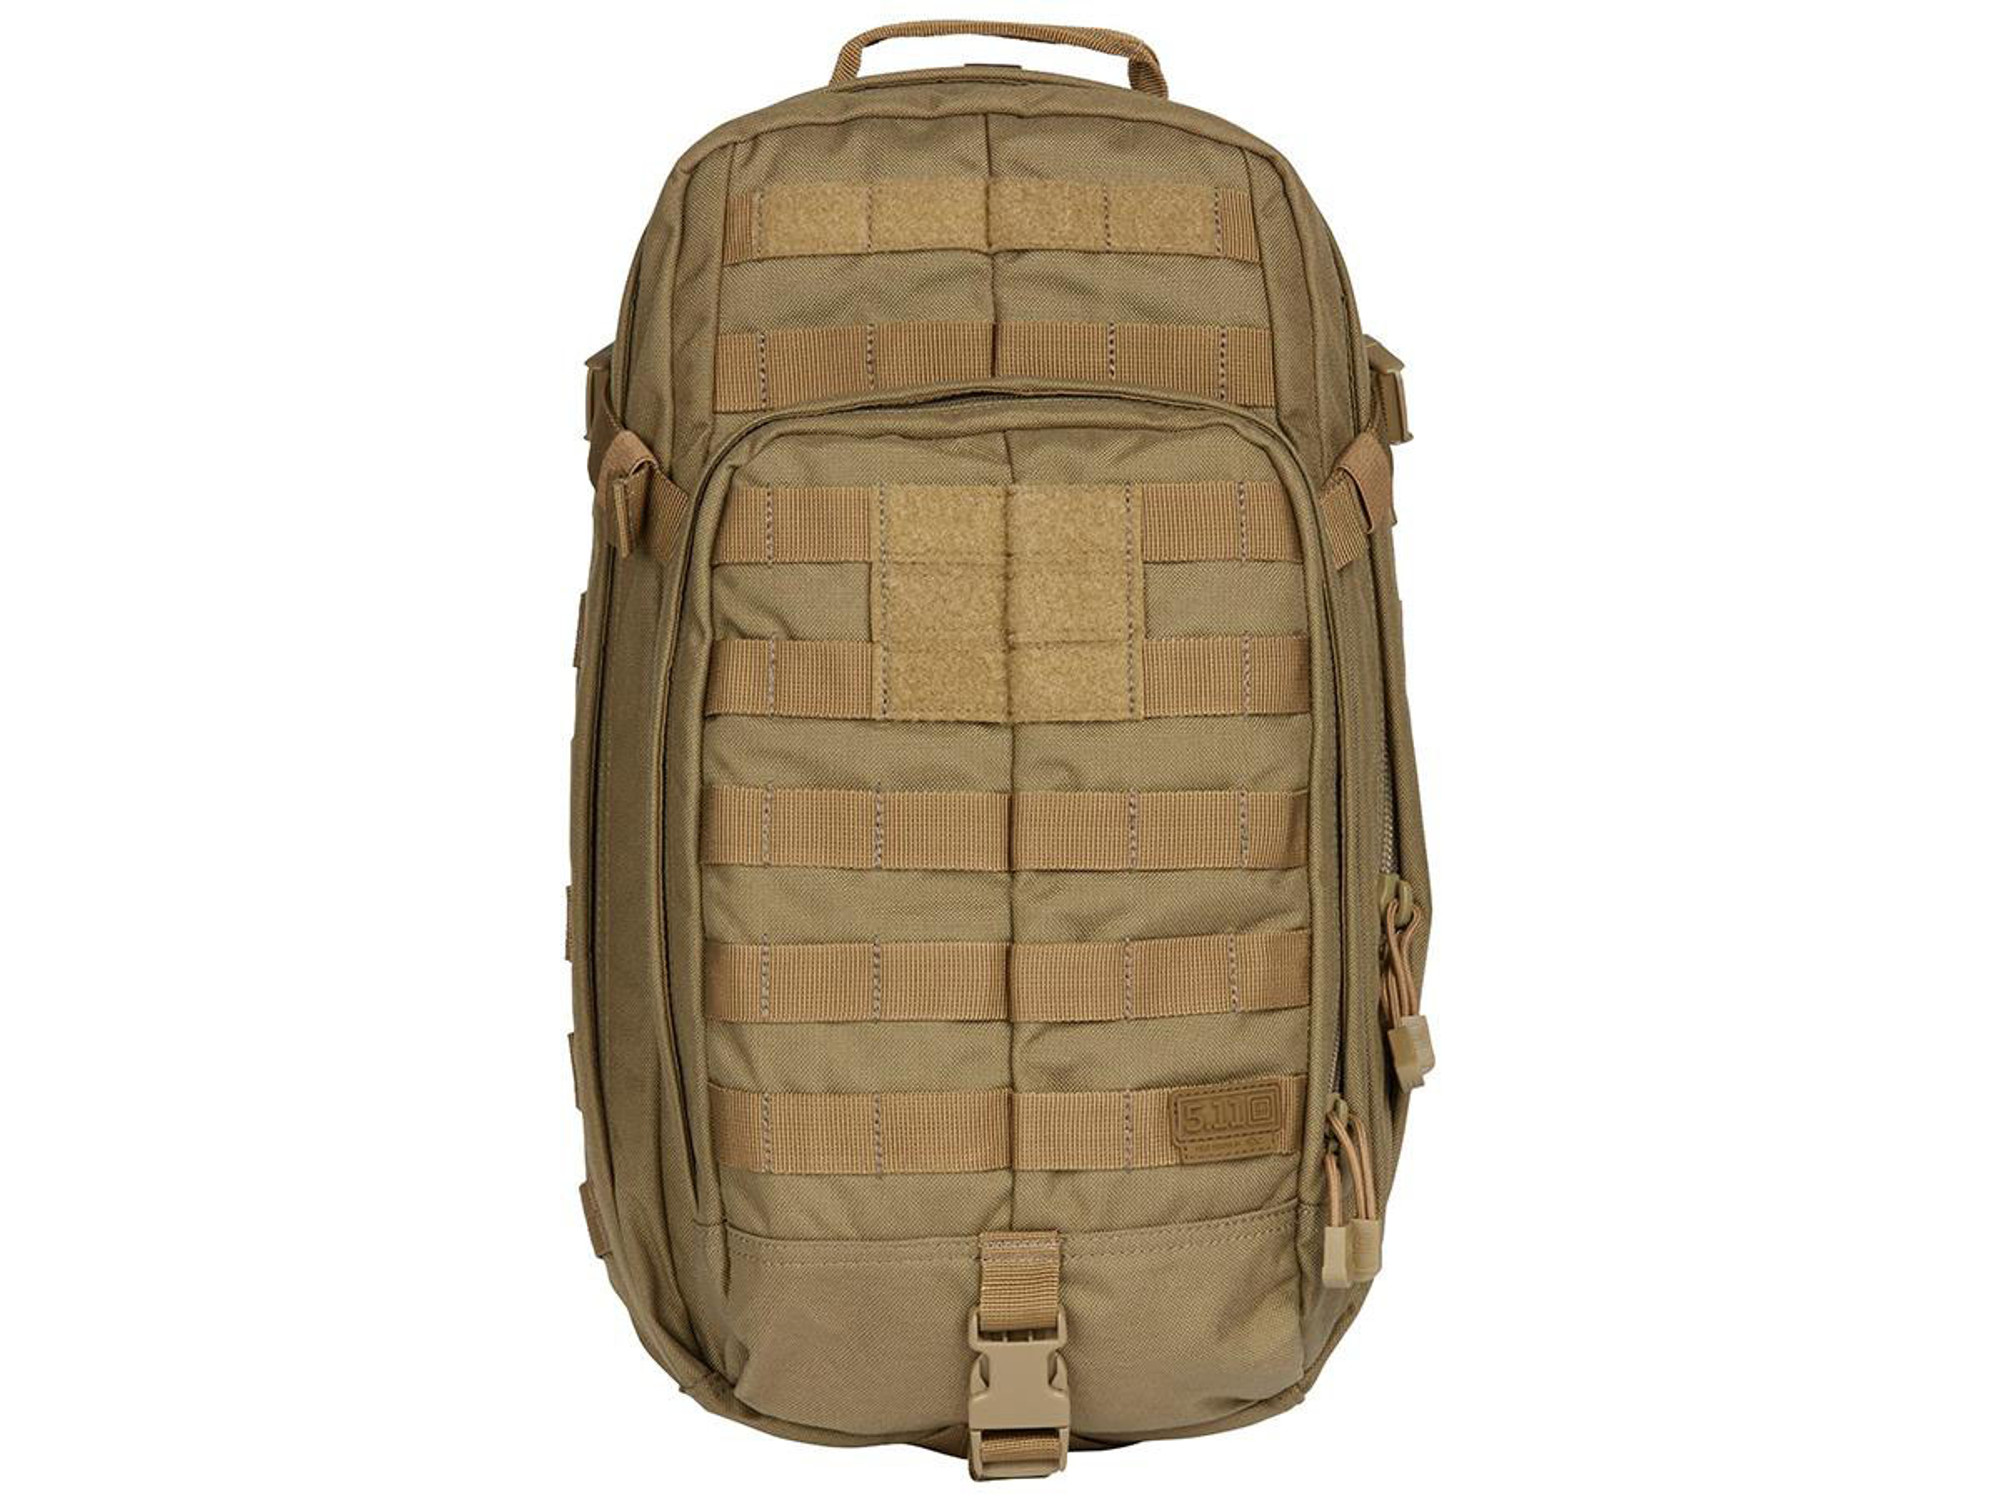 5.11 Tactical Rush MOAB 10 Backpack (Color: Sandstone)